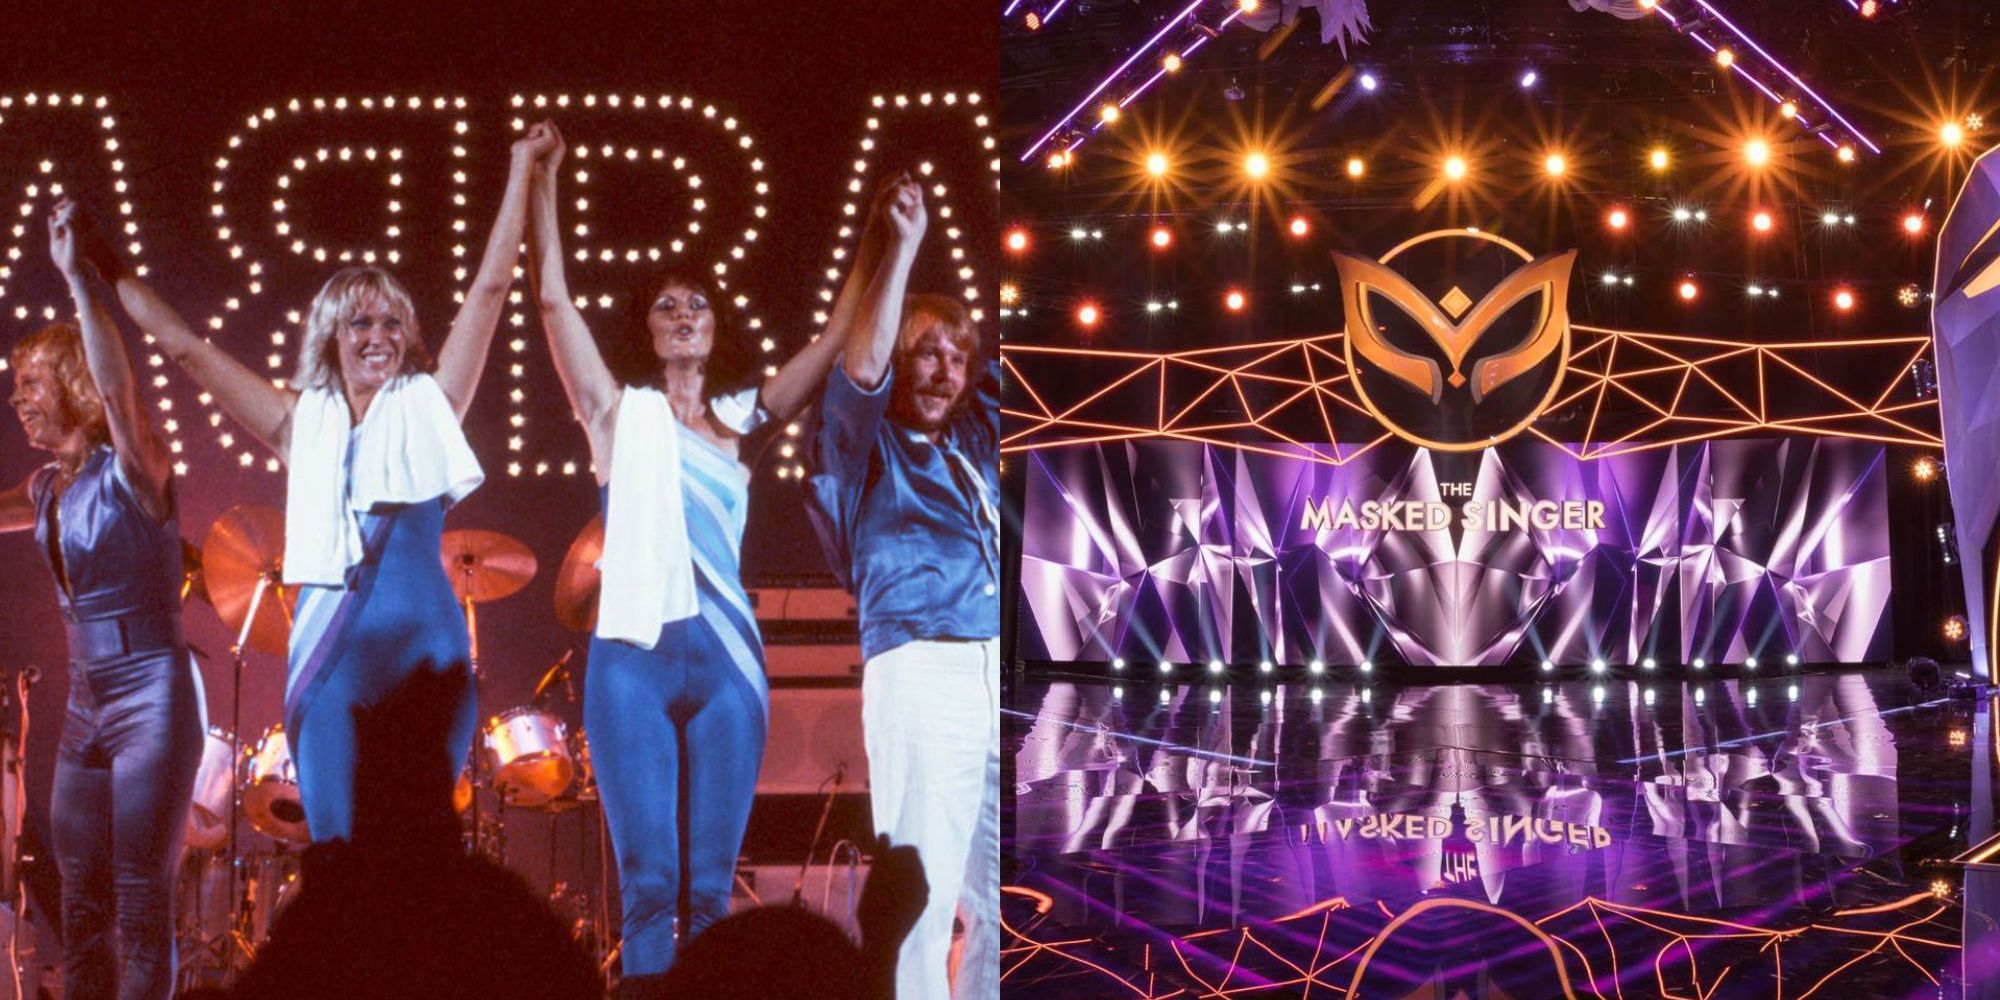 Split image of ABBA and The Masked Singer stage